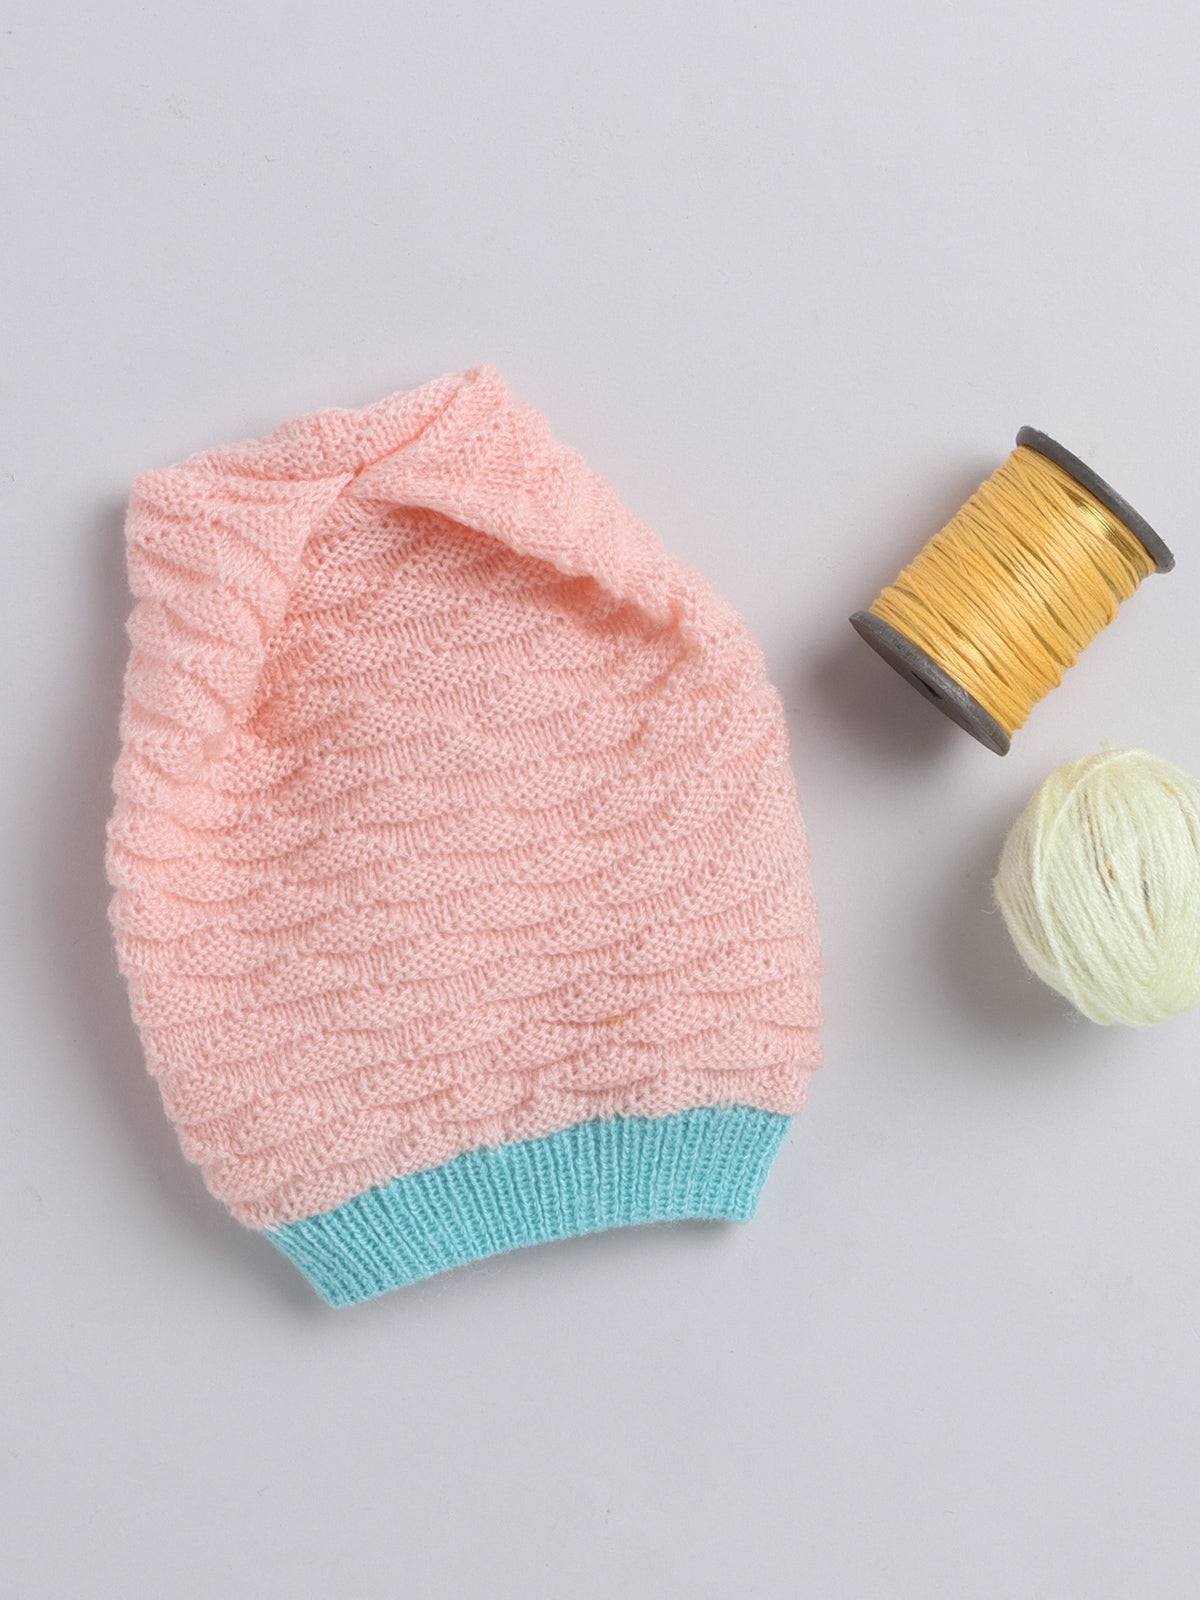 Elegant knitted Textured Round Cap with, Pink Color